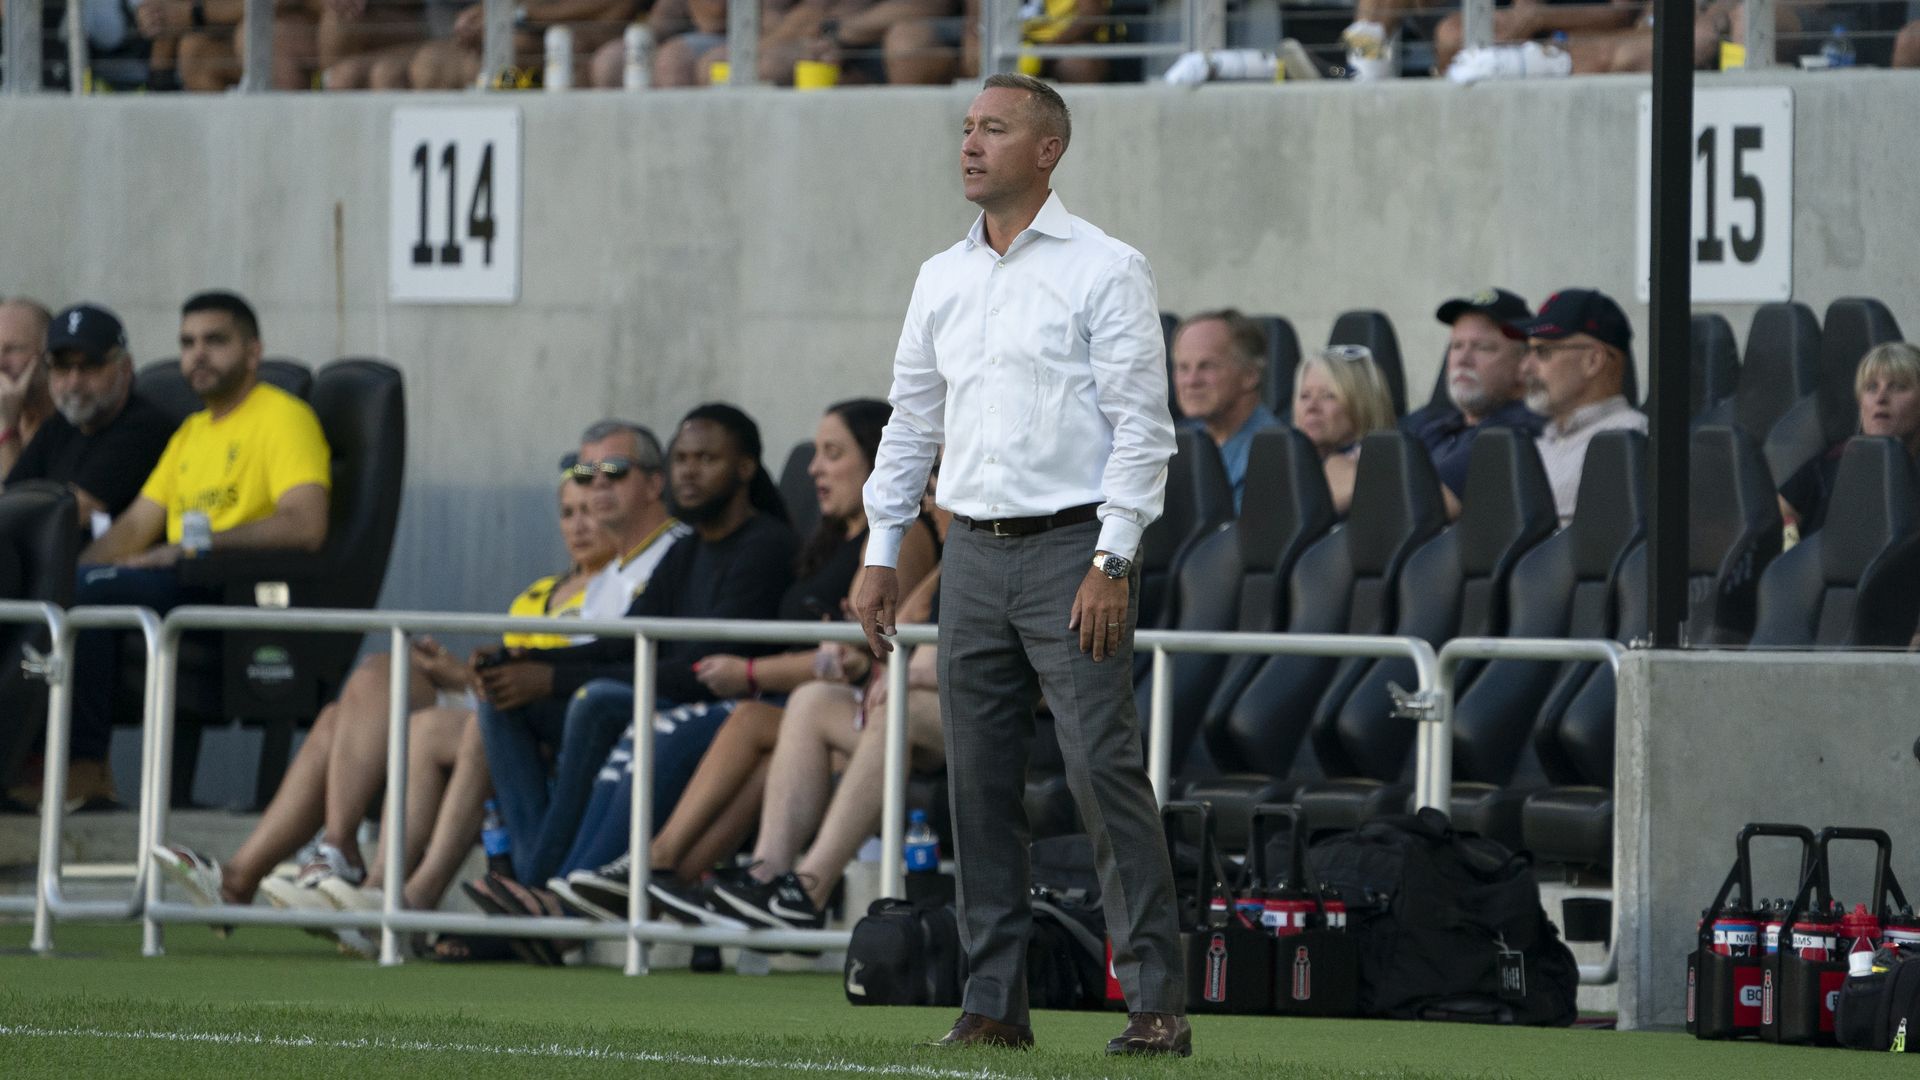 Crew head coach Caleb Porter stands on the field during a match